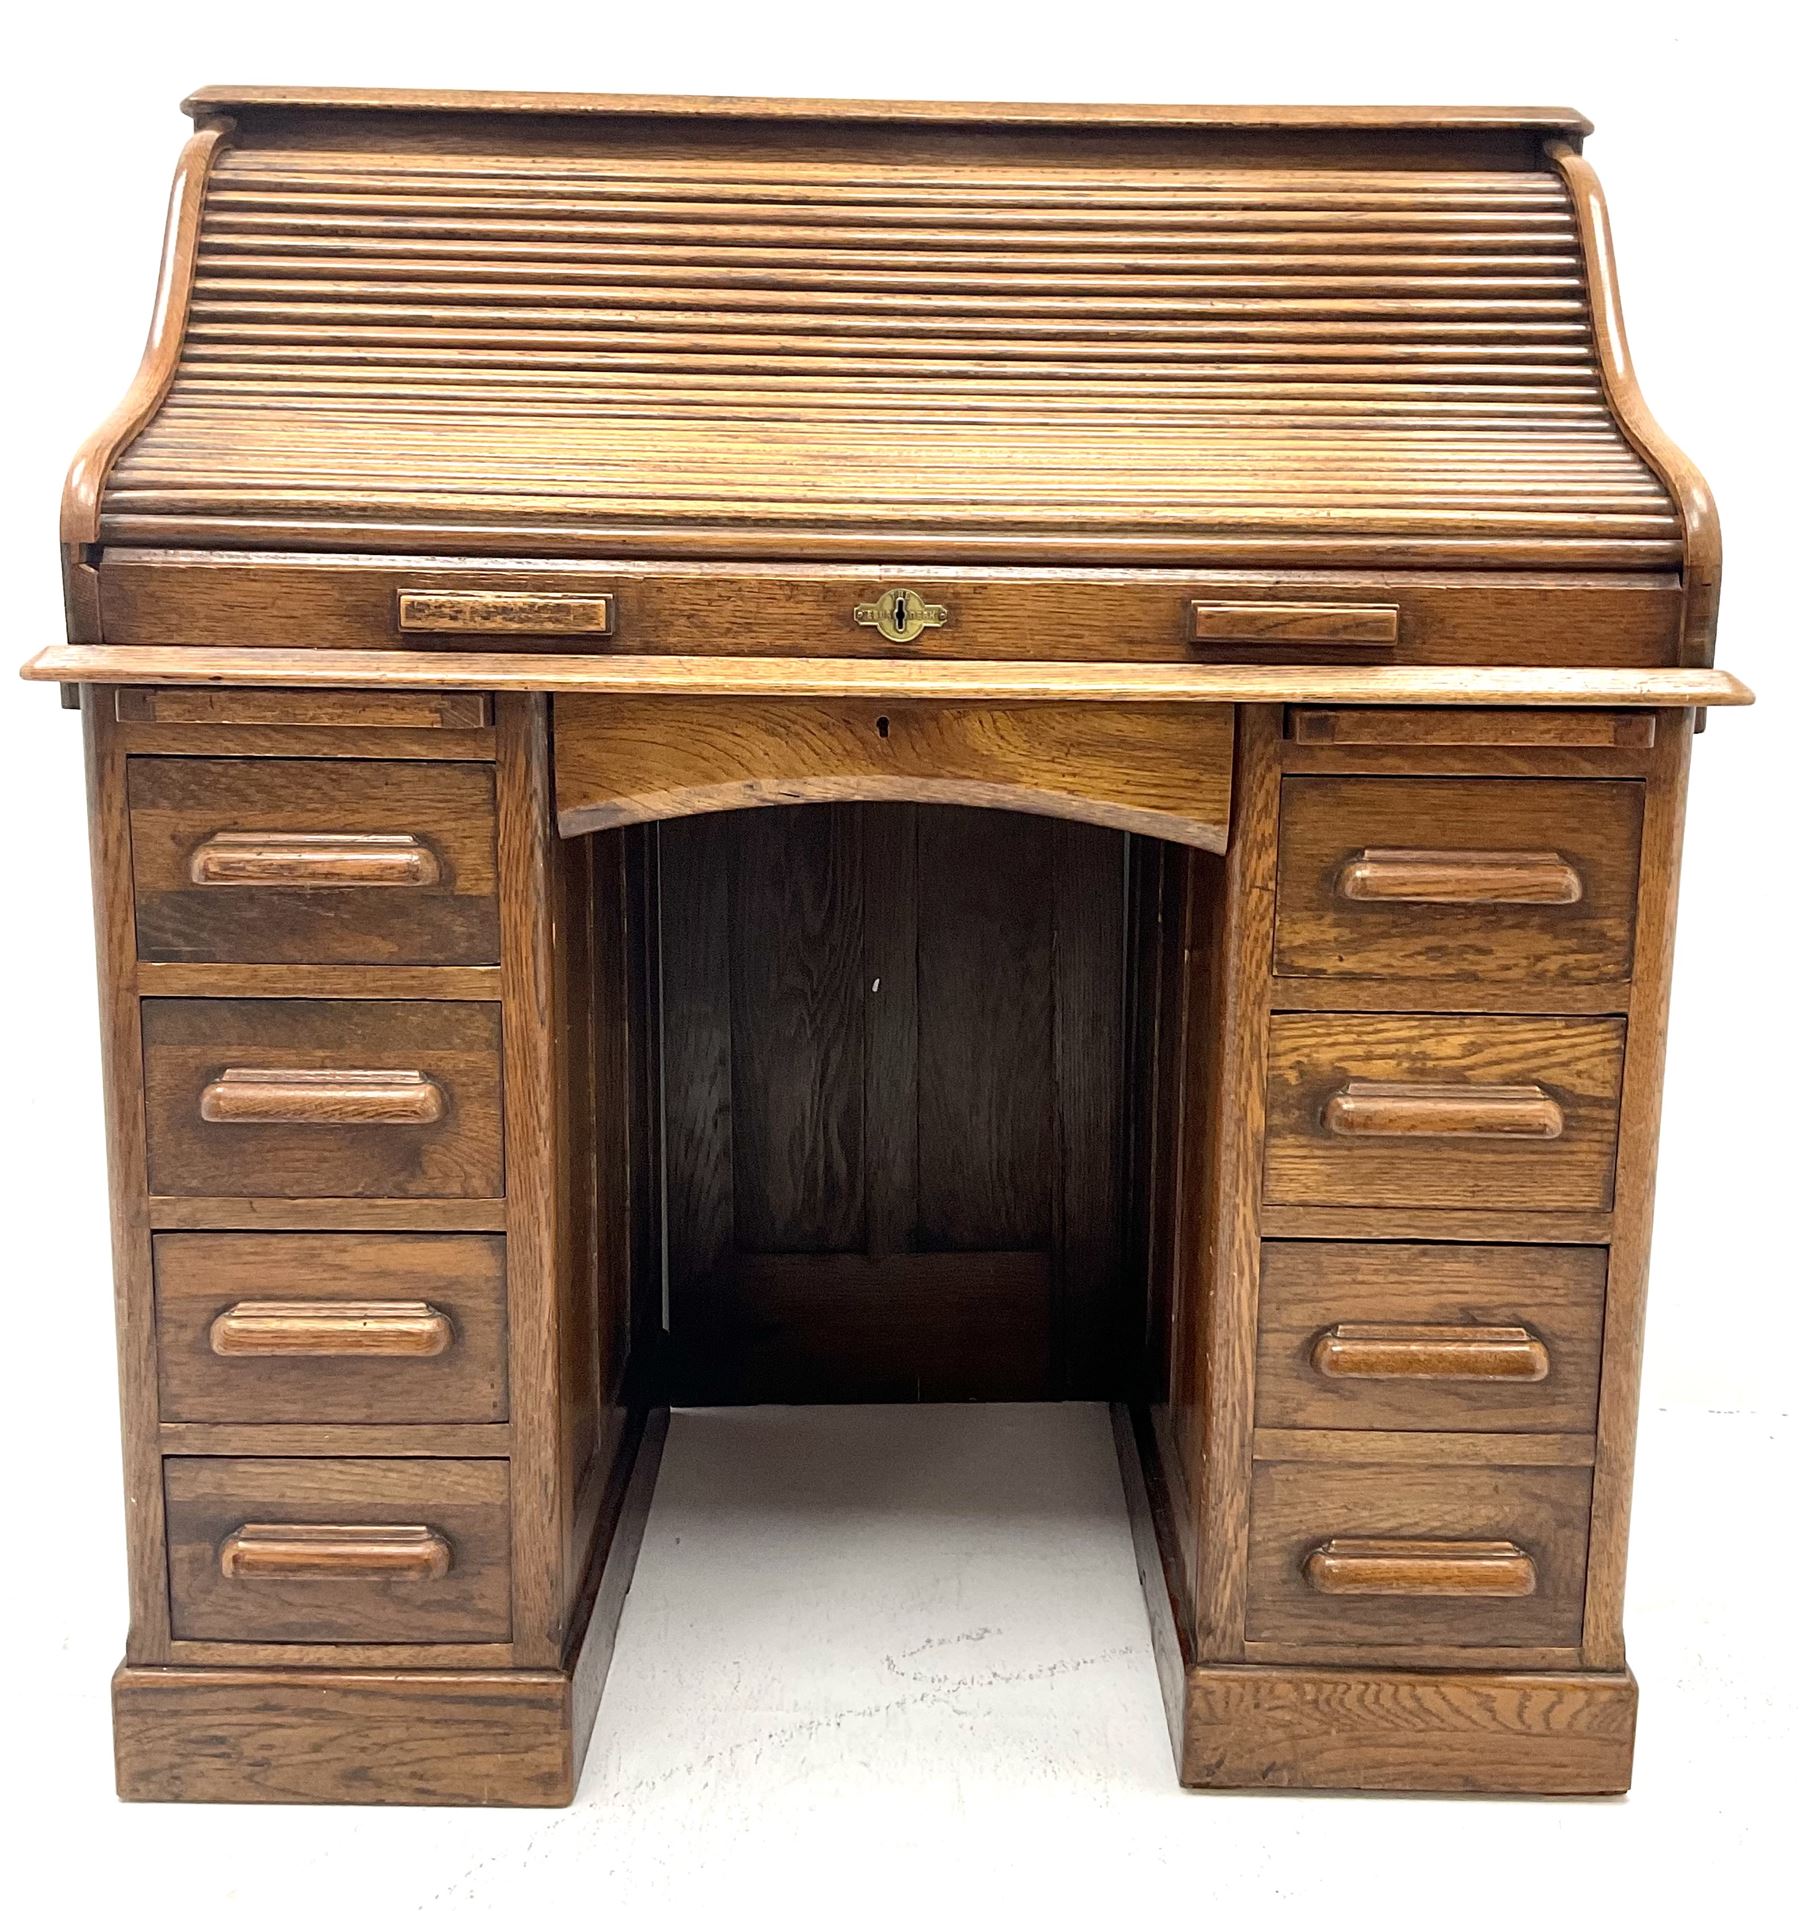 Early 20th century oak twin pedestal shaped tambour roll top desk enclosing fitted interior - Image 2 of 5